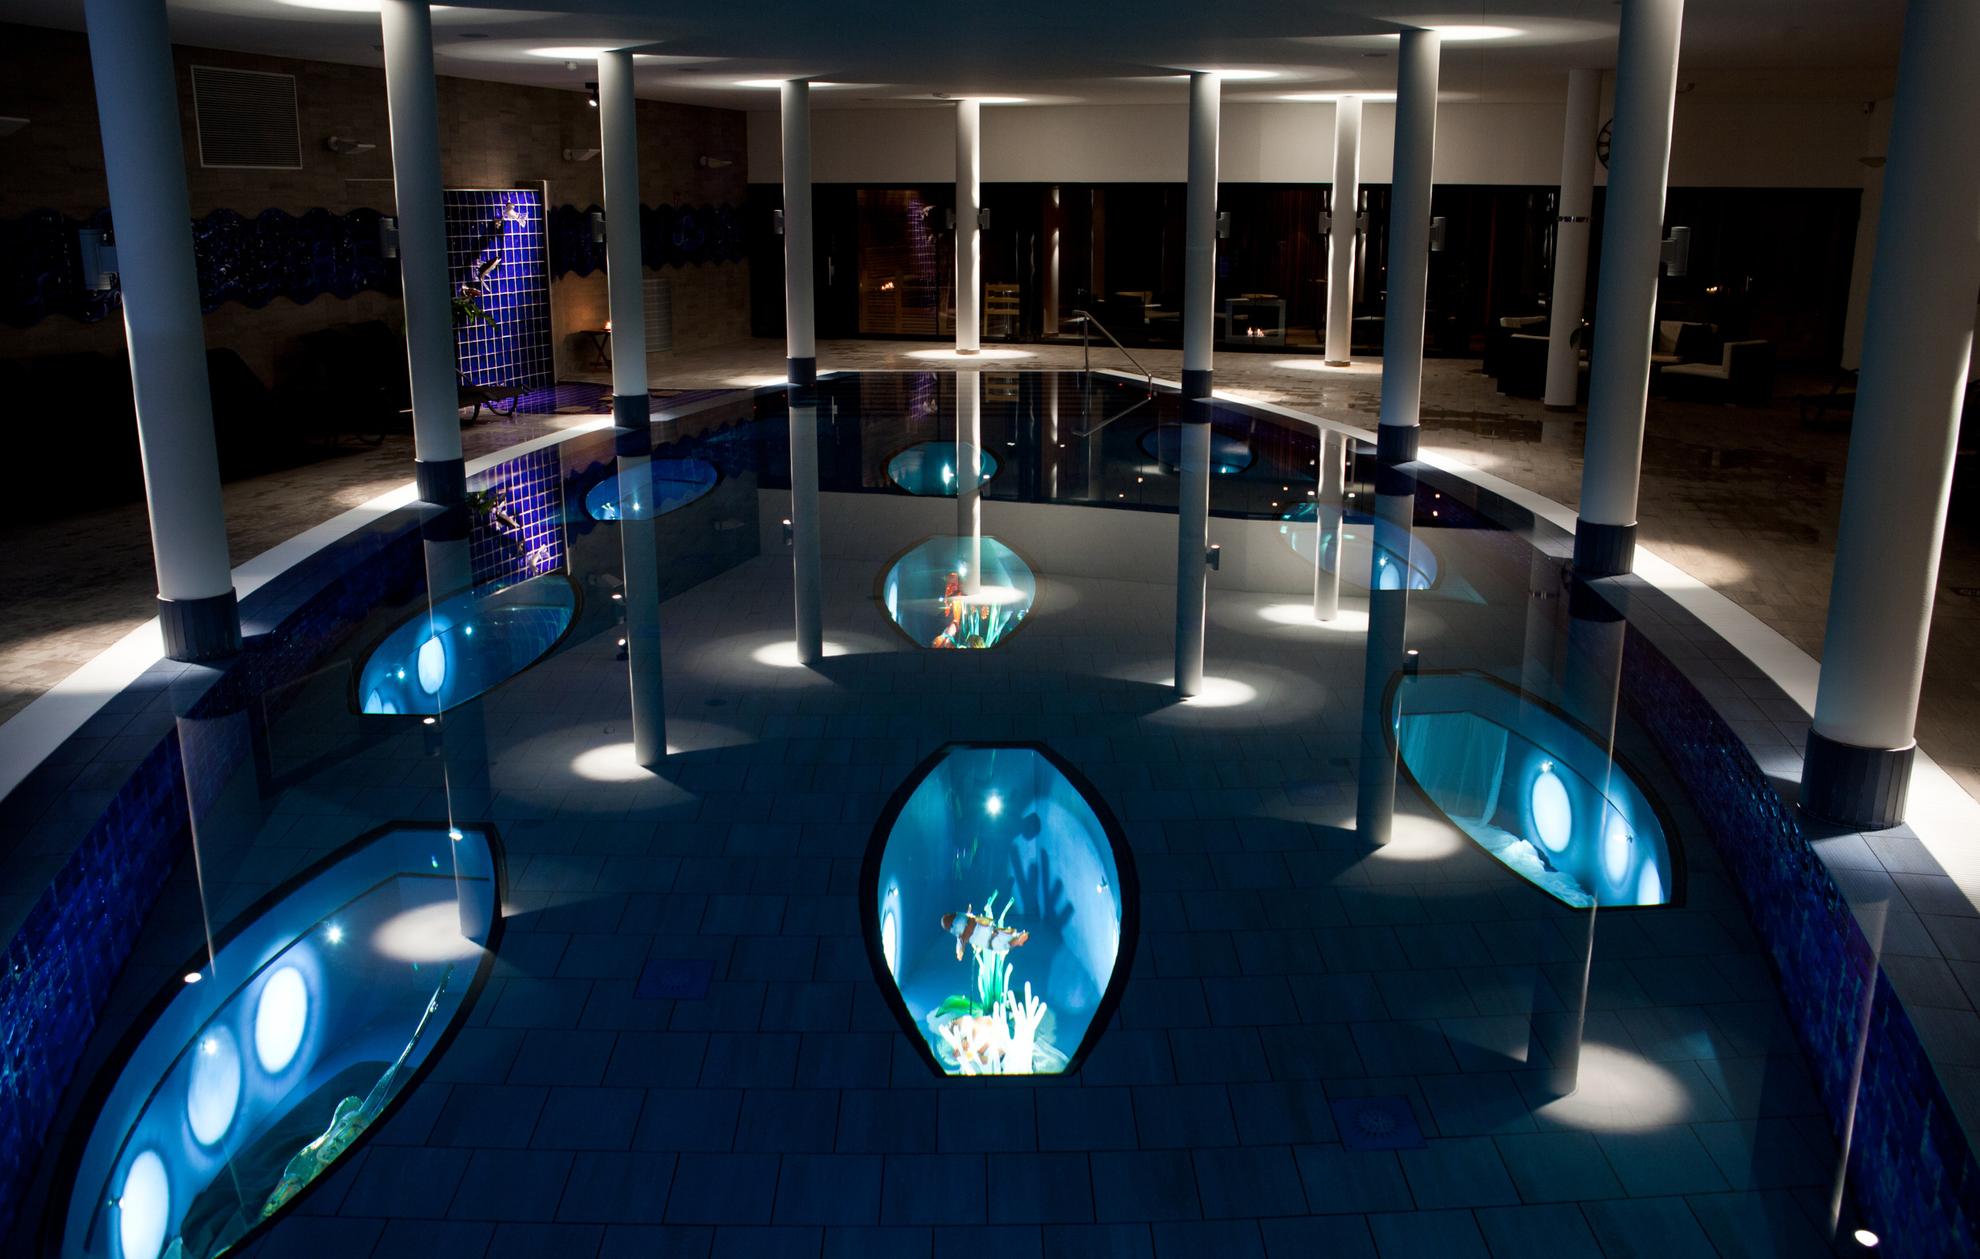 An indoor pool where the light is dimmed. In the pool are illuminated art exhibitions with glass fishes.